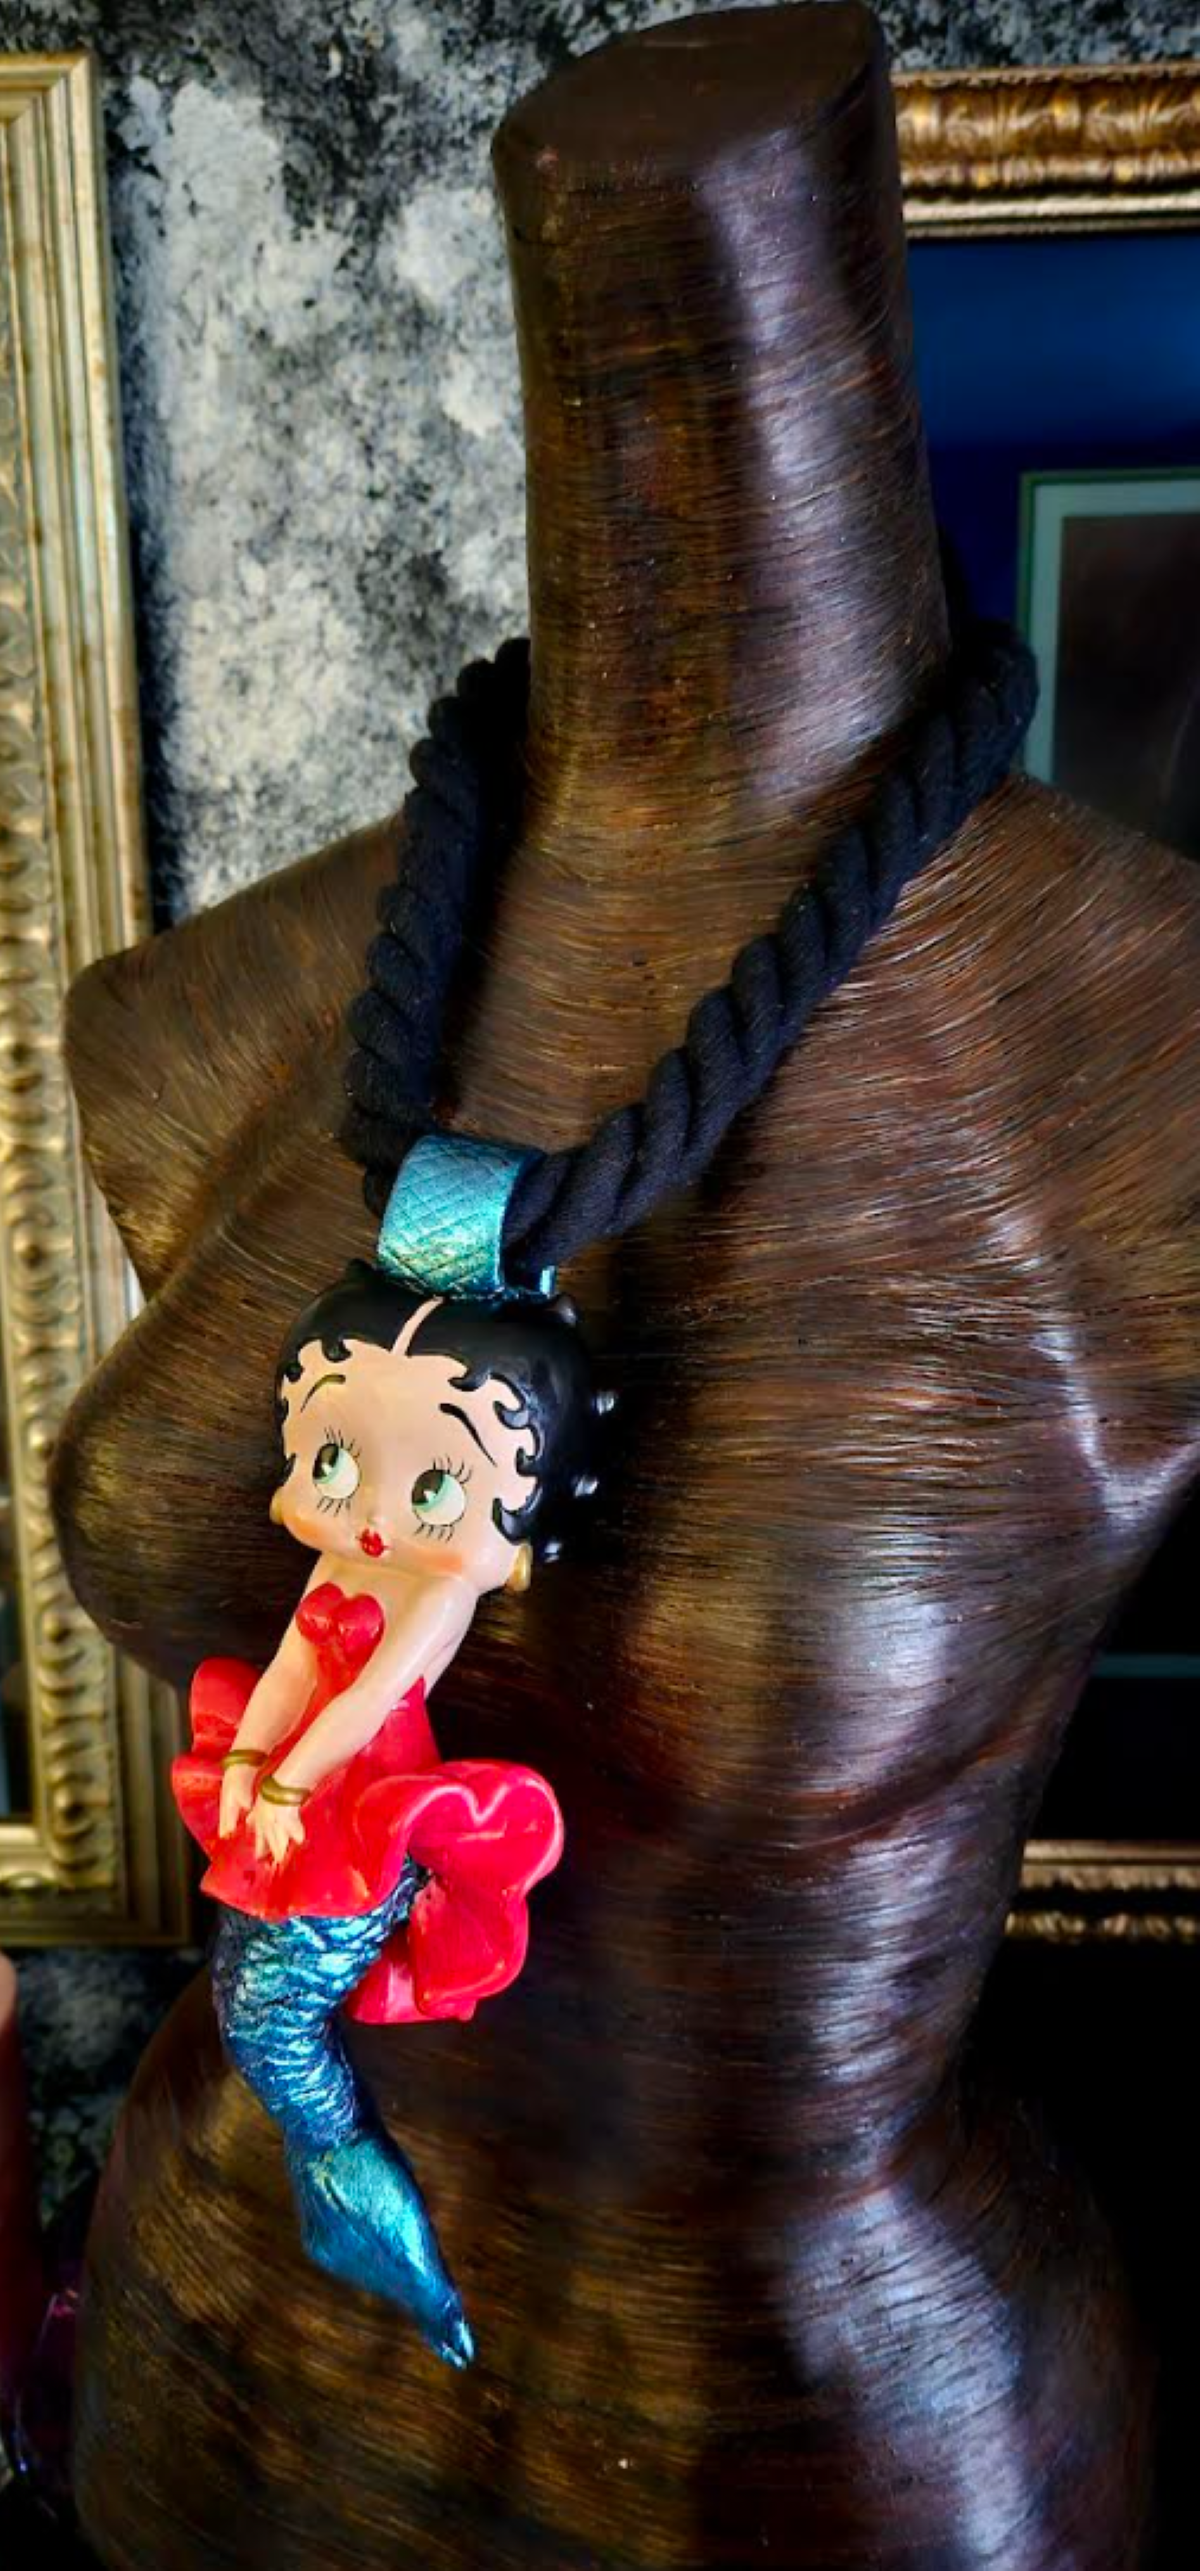 Betty Boop Sculpted Mermaid Statement Pendant -   Whimsical Femme Fatale Cartoon Character With Black Rope - Lagenlook Talisman - Kat Kouture Jewelry